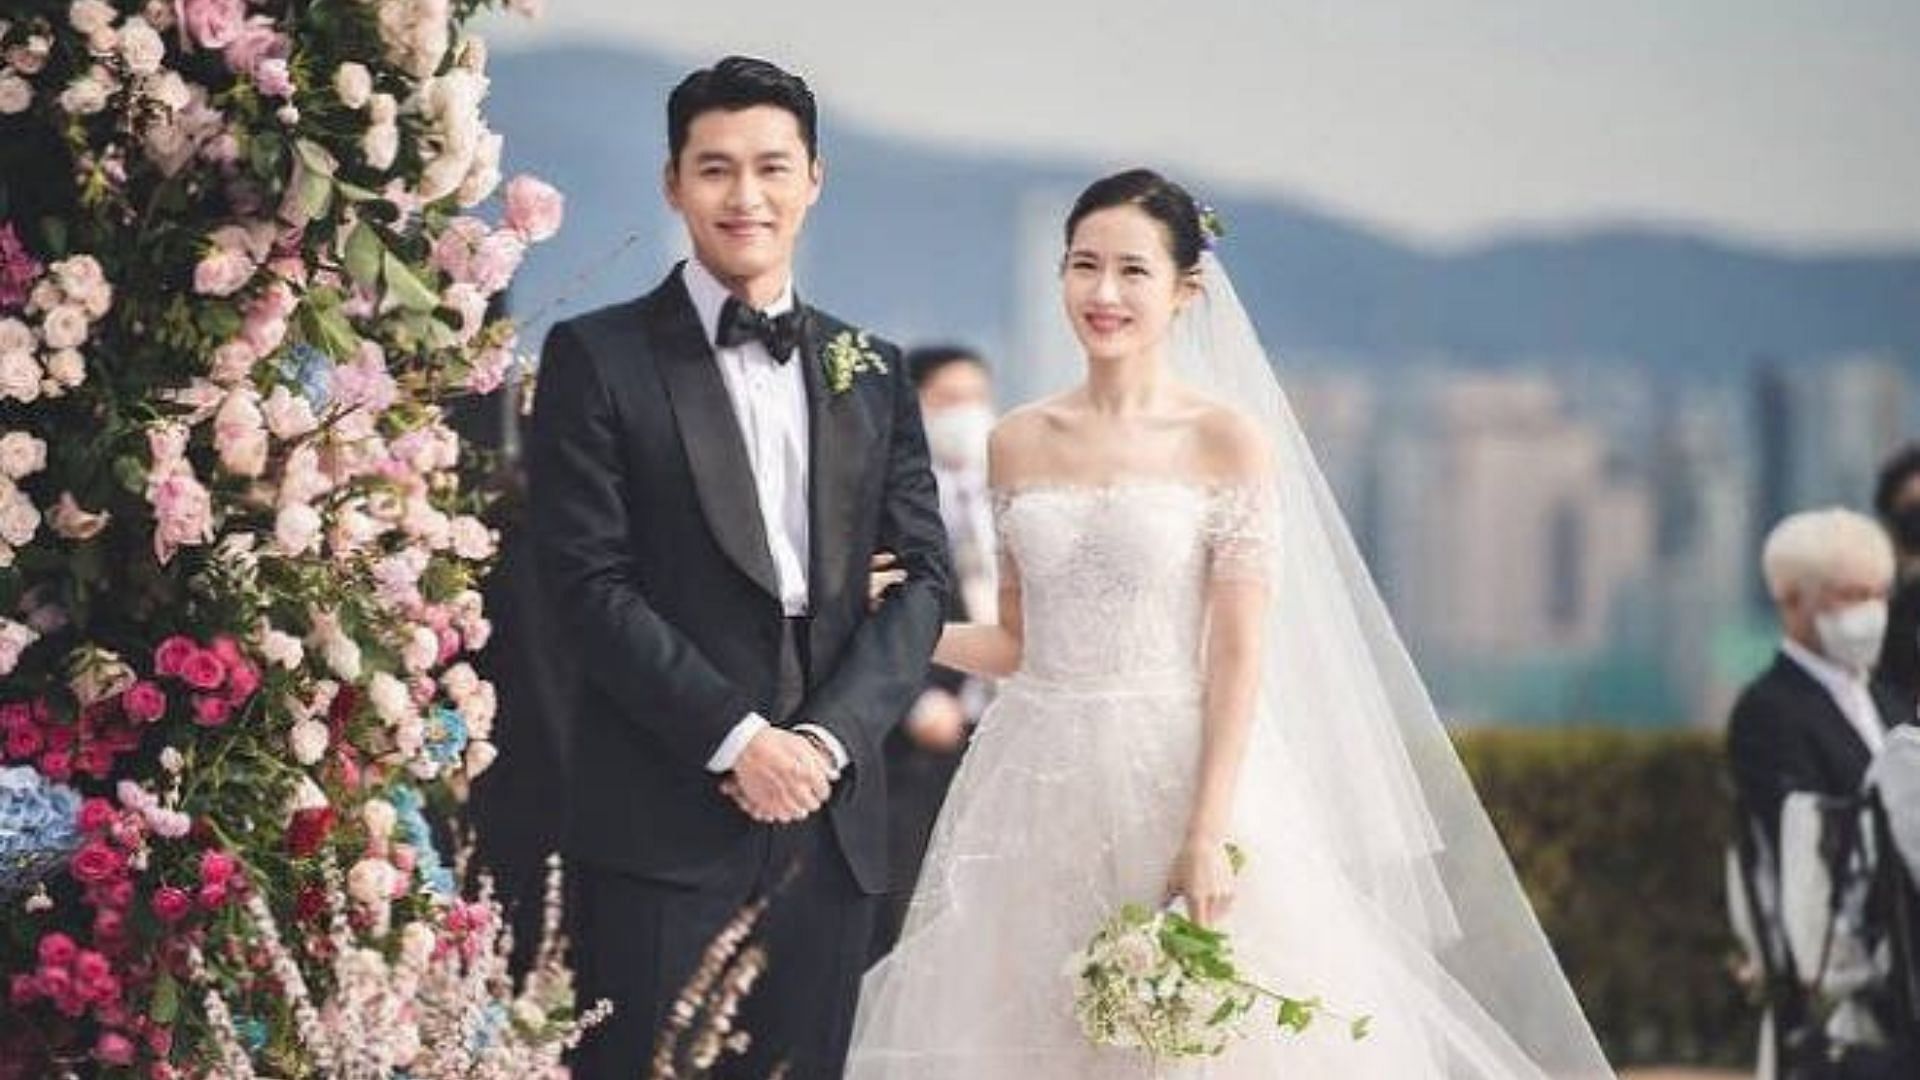 Hyun Bin and Son Ye-jin got married in March this year (Image via Instagram)